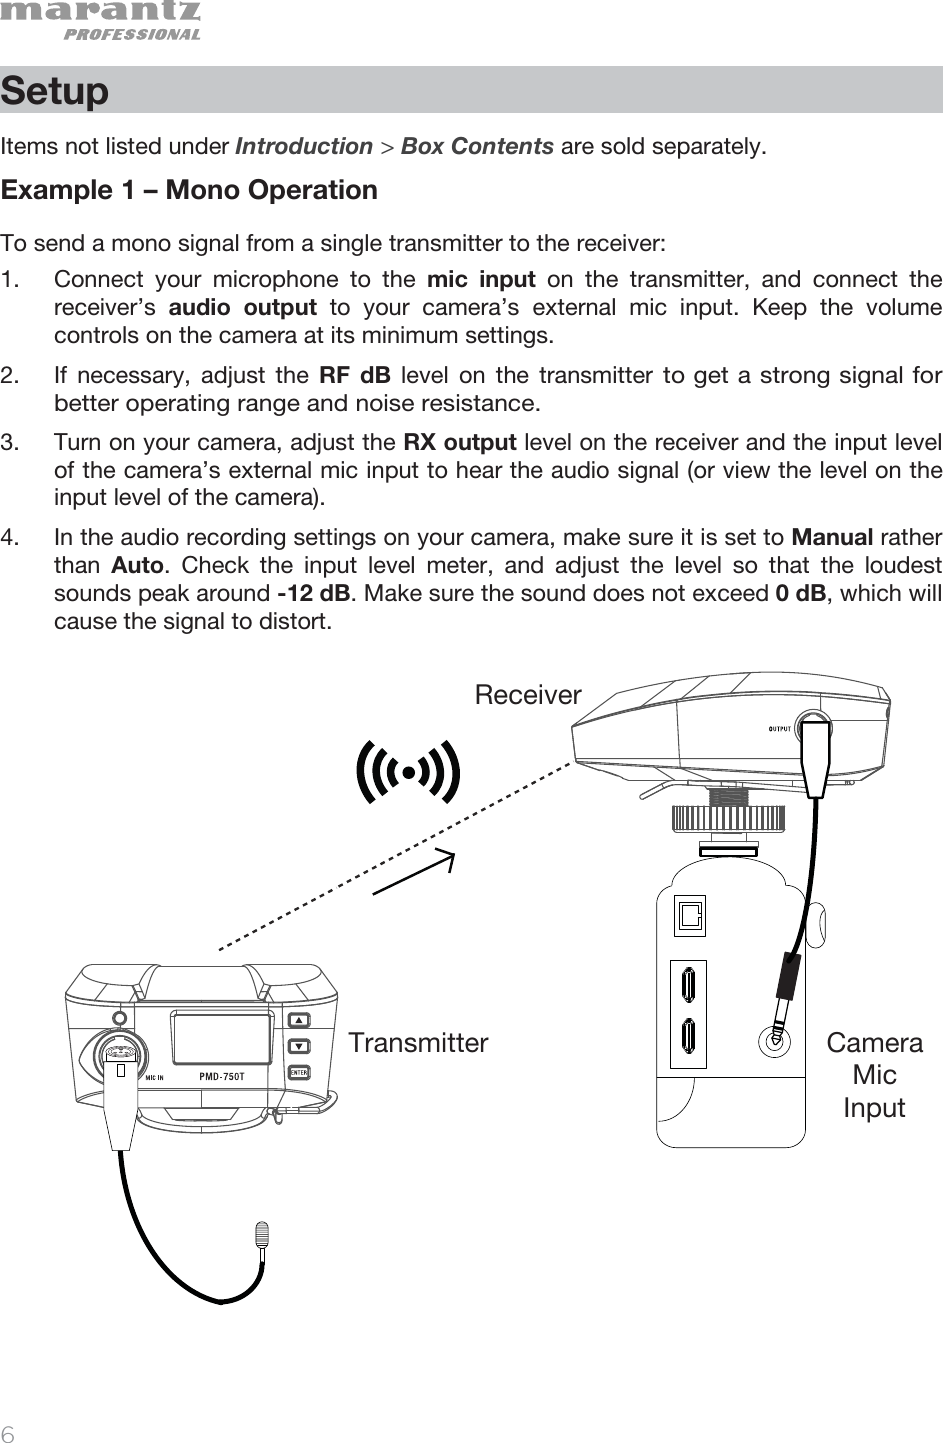   6   Setup  Items not listed under Introduction &gt; Box Contents are sold separately.  Example 1 – Mono Operation To send a mono signal from a single transmitter to the receiver: 1. Connect your microphone to the mic input on the transmitter, and connect the receiver’s  audio output to your camera’s external mic input. Keep the volume controls on the camera at its minimum settings. 2. If necessary, adjust the RF dB level on the transmitter to get a strong signal for better operating range and noise resistance.  3. Turn on your camera, adjust the RX output level on the receiver and the input level of the camera’s external mic input to hear the audio signal (or view the level on the input level of the camera).   4. In the audio recording settings on your camera, make sure it is set to Manual rather than  Auto. Check the input level meter, and adjust the level so that the loudest sounds peak around -12 dB. Make sure the sound does not exceed 0 dB, which will cause the signal to distort.                        ReceiverTransmitter Camera  Mic  Input